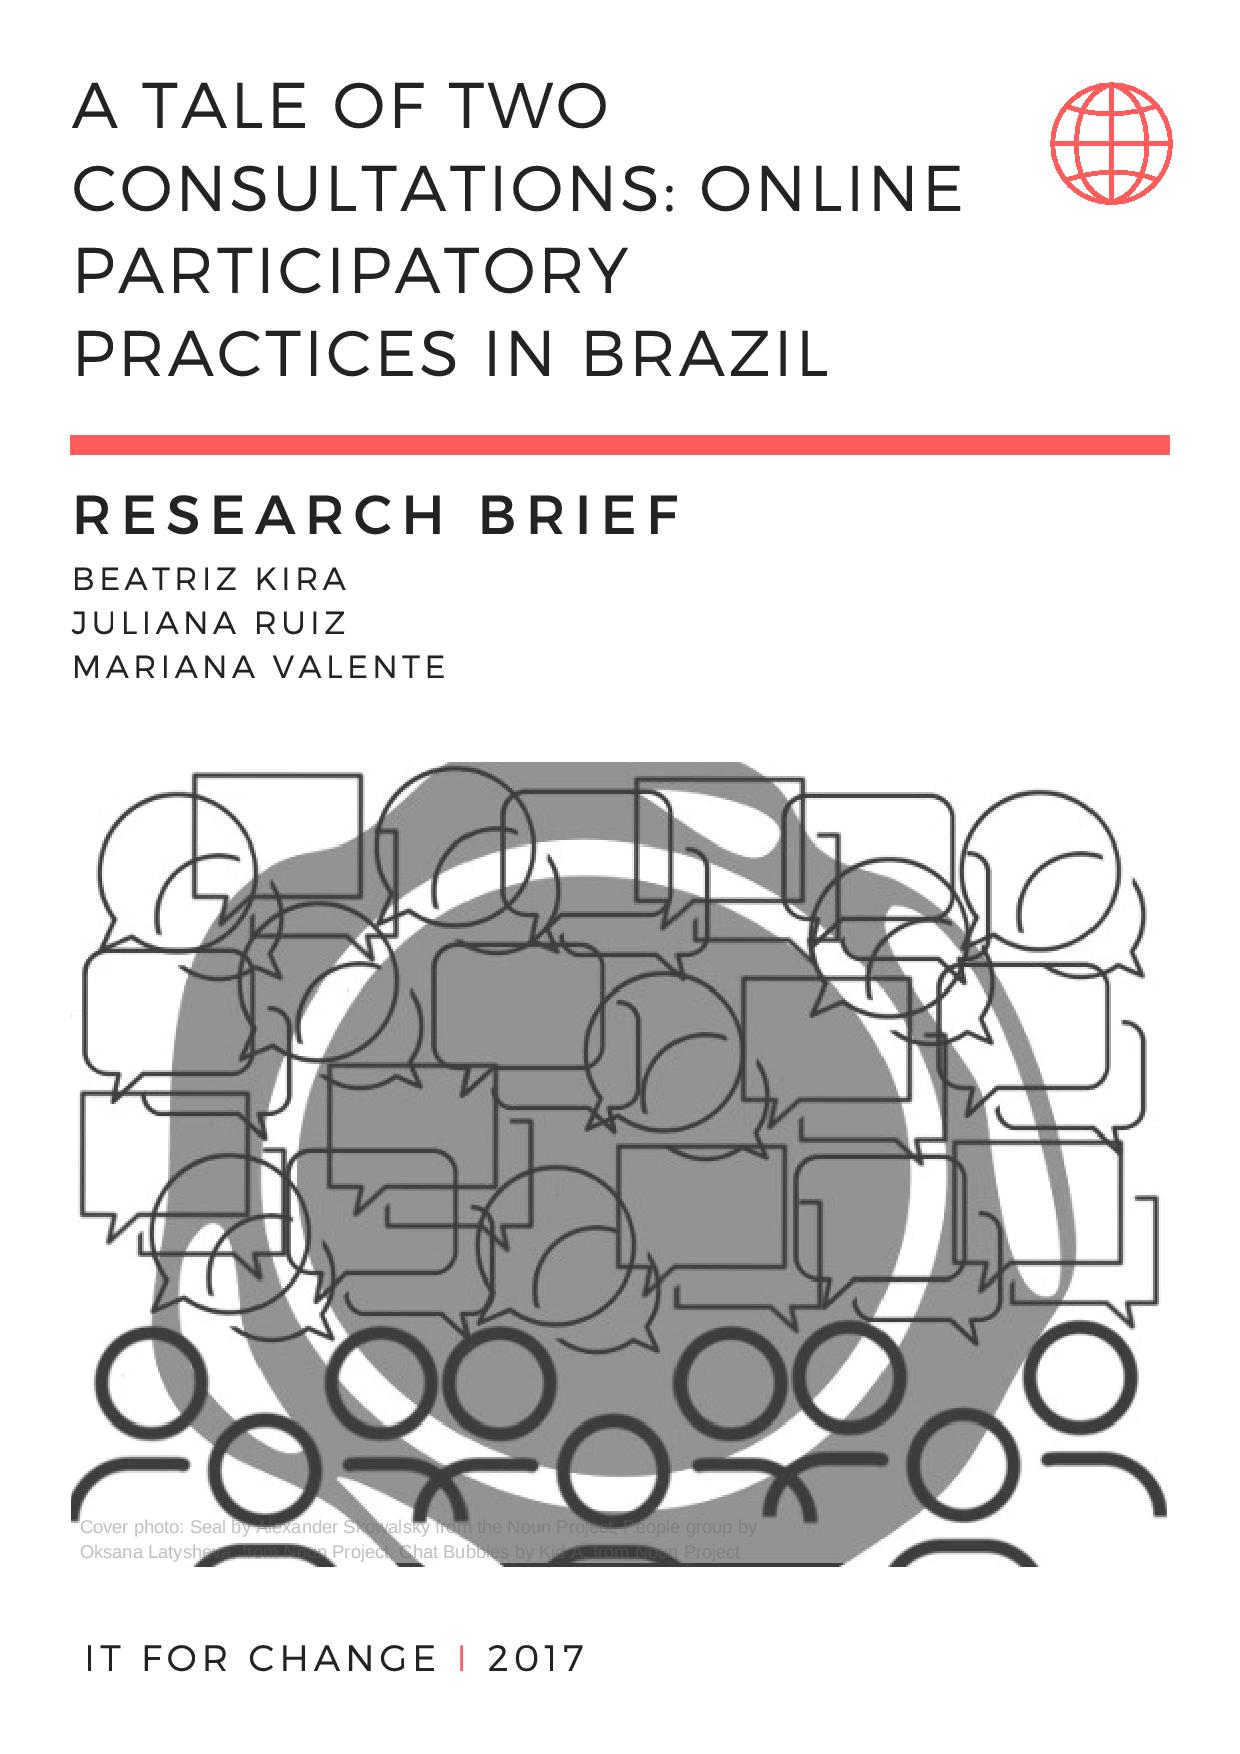 Cover of the article "A Tale of Two Consultations: Online Participatory Practices in Brazil", by Beatriz Kira, Juliana Ruiz, Mariana Valente. Below the title and the authors there is an illustration of the outline of individuals and speech bubbles in black, white and gray.